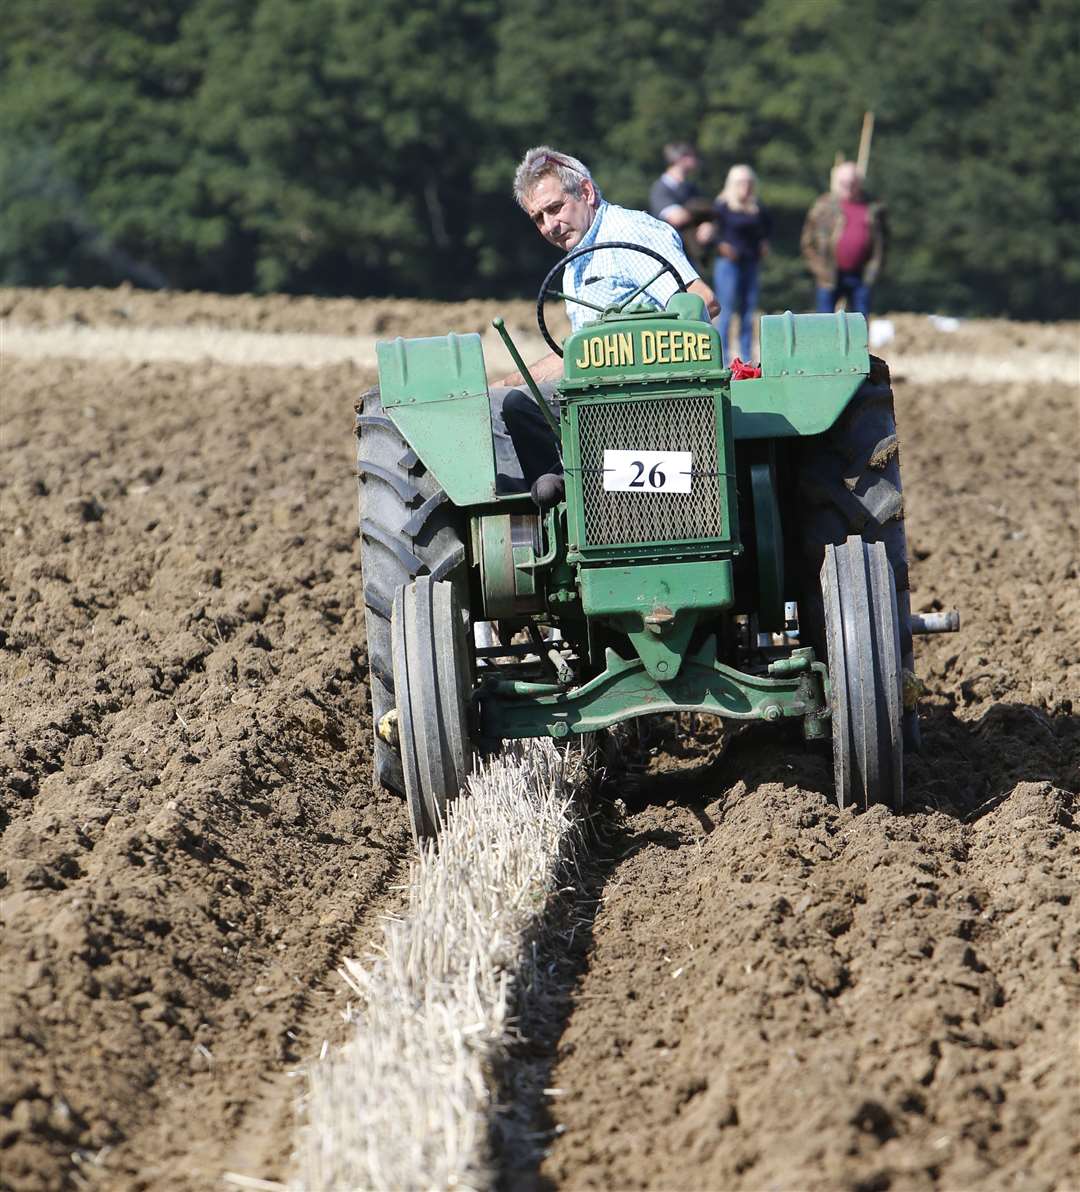 Ploughing patience at a previous Weald of Kent Ploughing Match Picture: Andy Jones